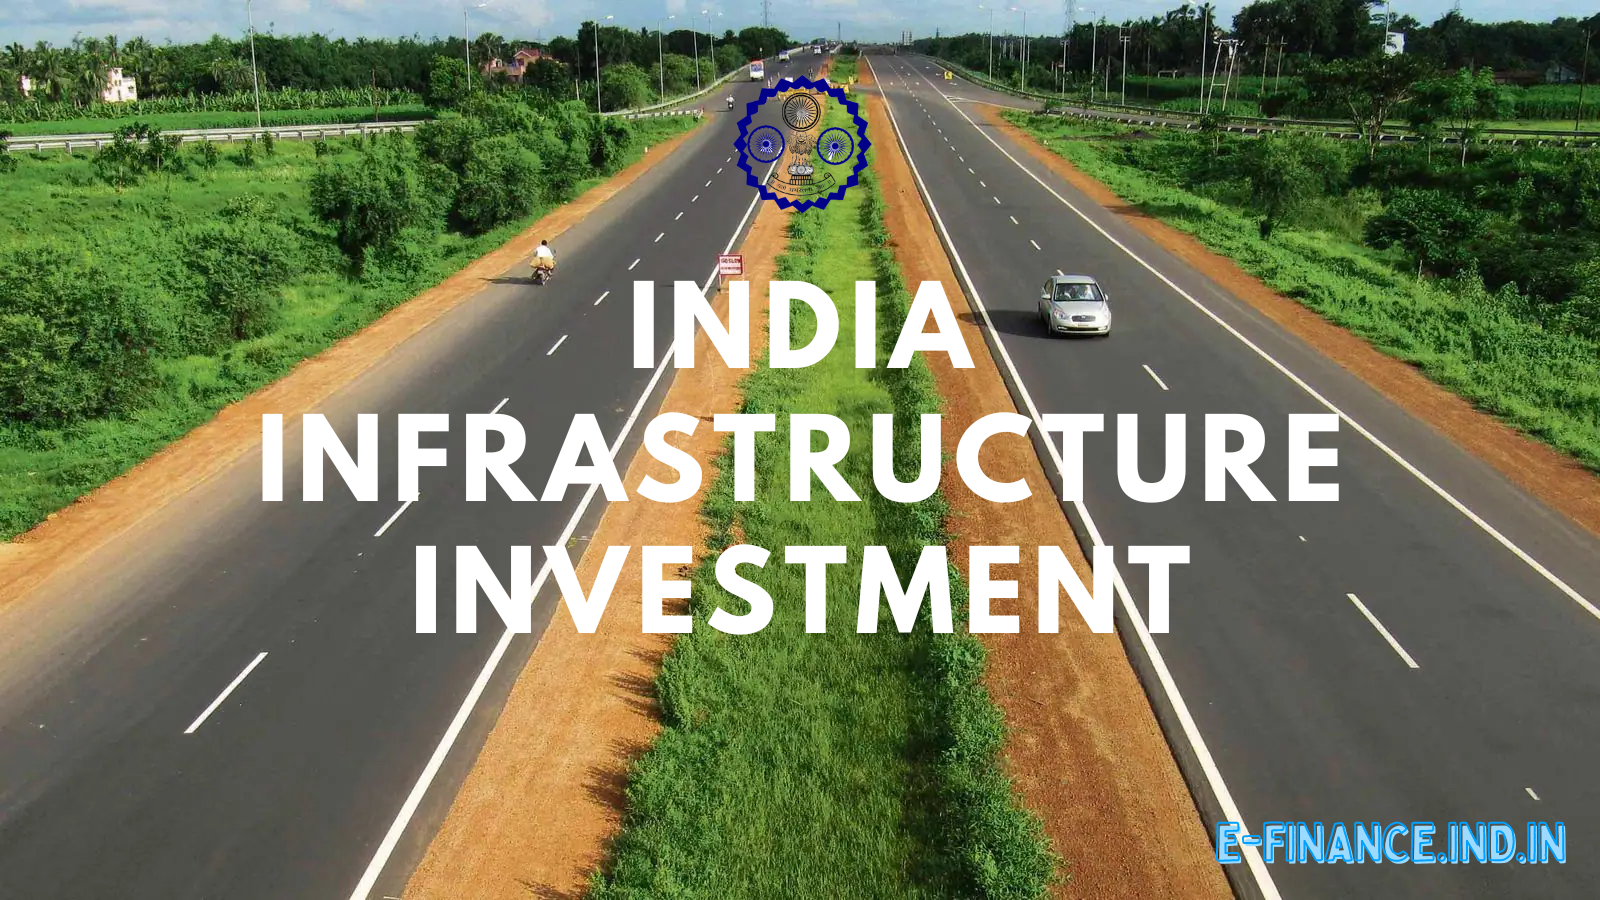 India Infrastructure Investment